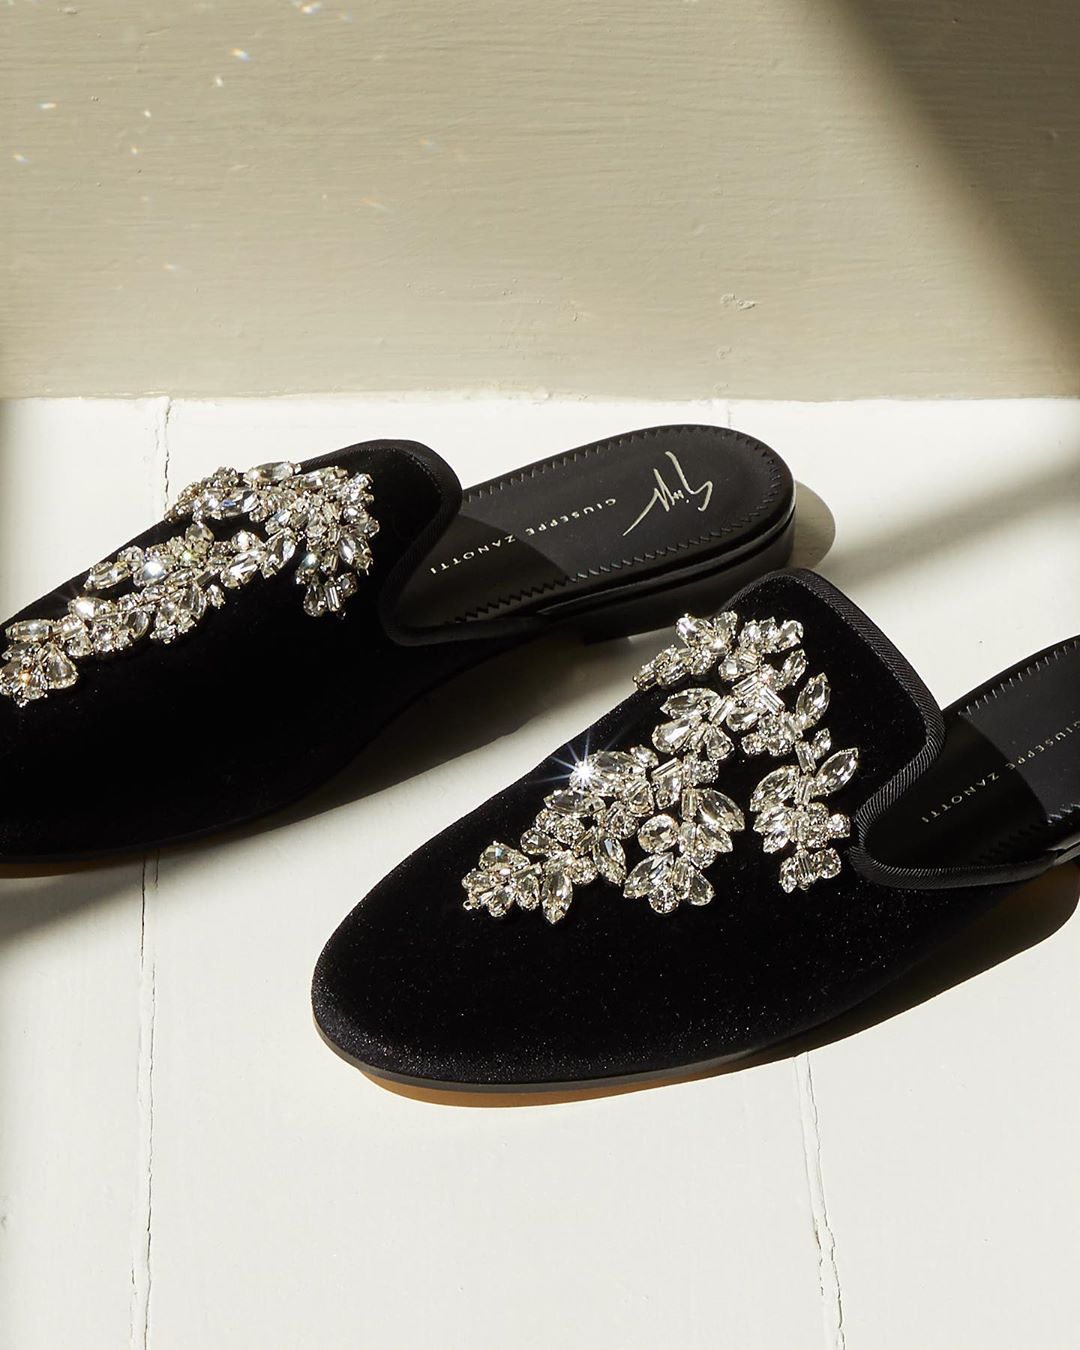 THE OUTNET - Make loafing around the house into a formal affair with an embellished pair of @guiseppezanotti slippers ✨

Shop all your favorite Instagram looks, just visit #linkinbio